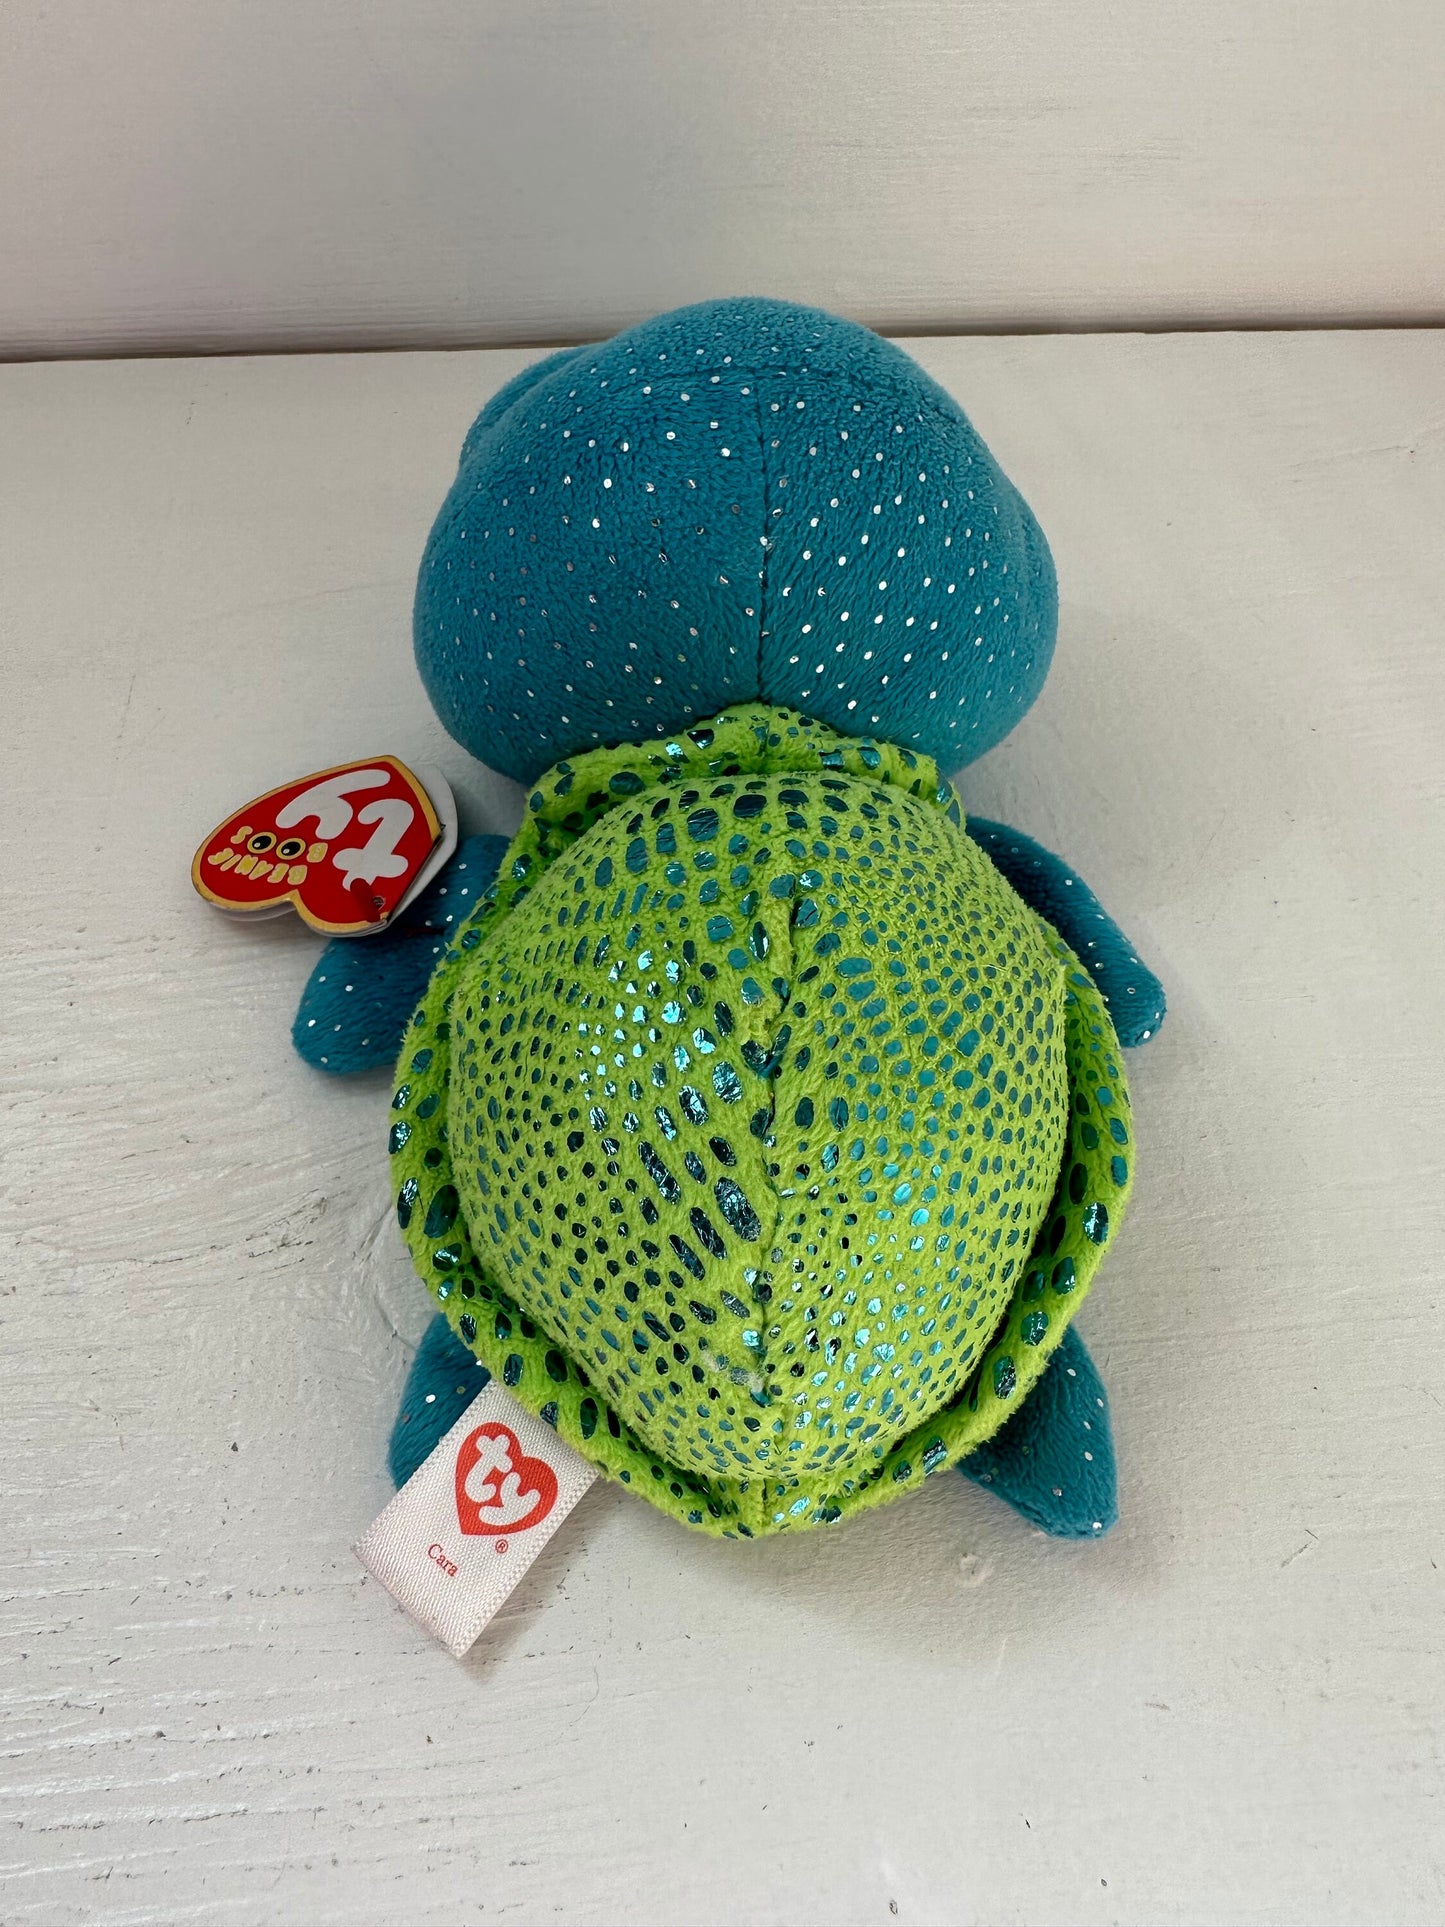 Ty Beanie Boo “Cara” the Blue and Green Turtle - Sea World Exclusive Rare! (6 inch)